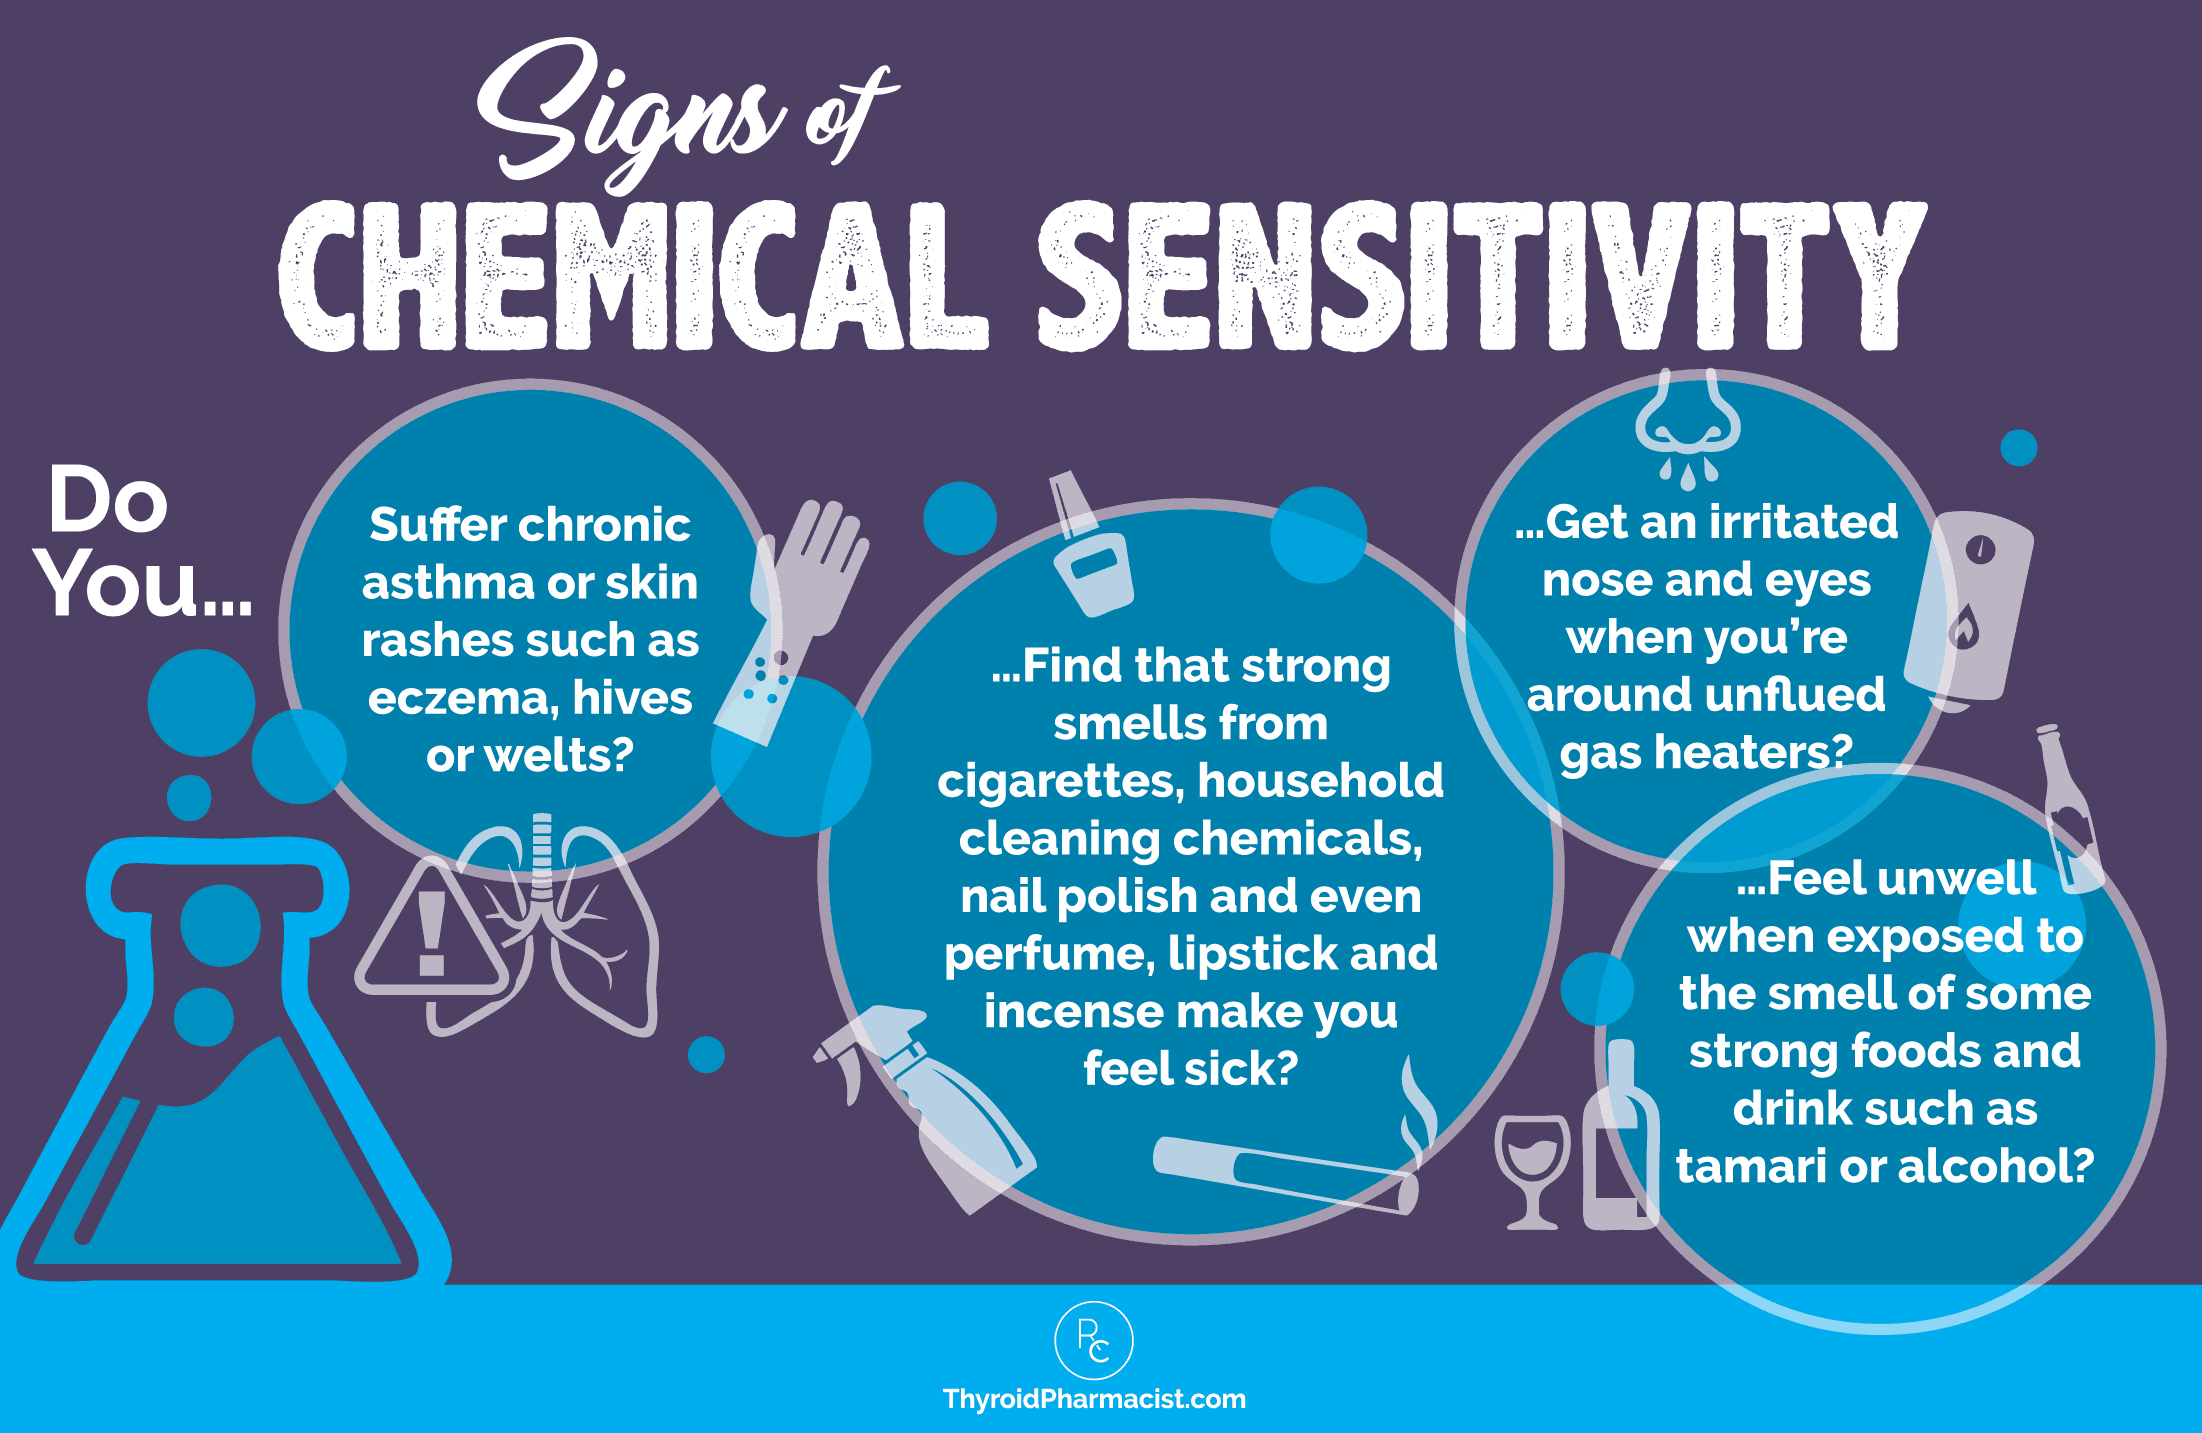 Signs of Chemical Sensitivity